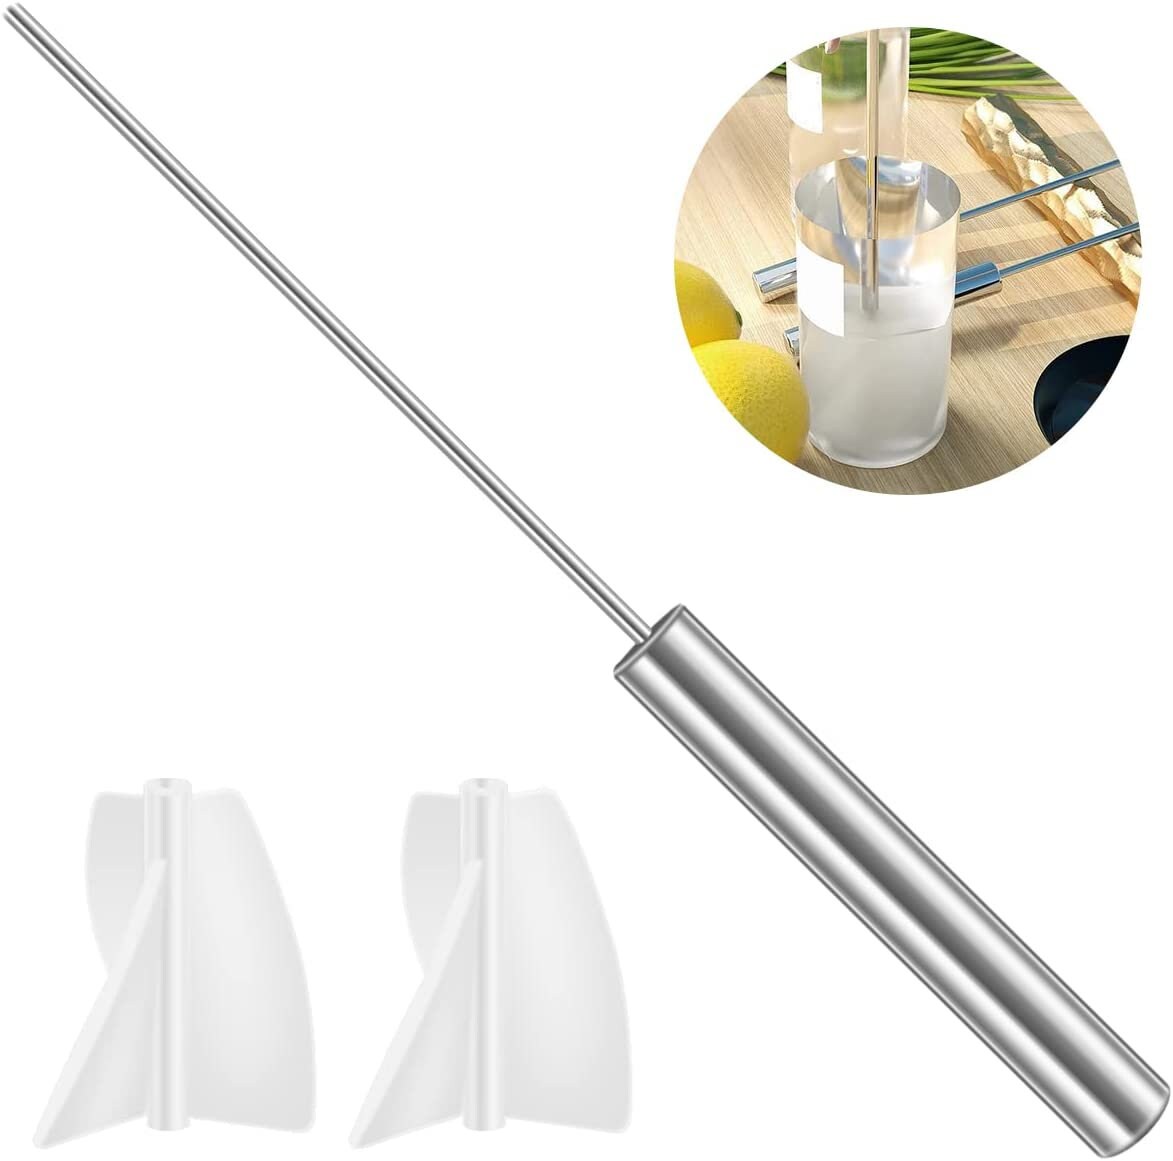 Semi-automatic Epoxy Resin Mixer Handheld Resin Stirrer With Reusable  Stirring Paddles for Minimizing Bubbles Portable Paint Mixing Tool 